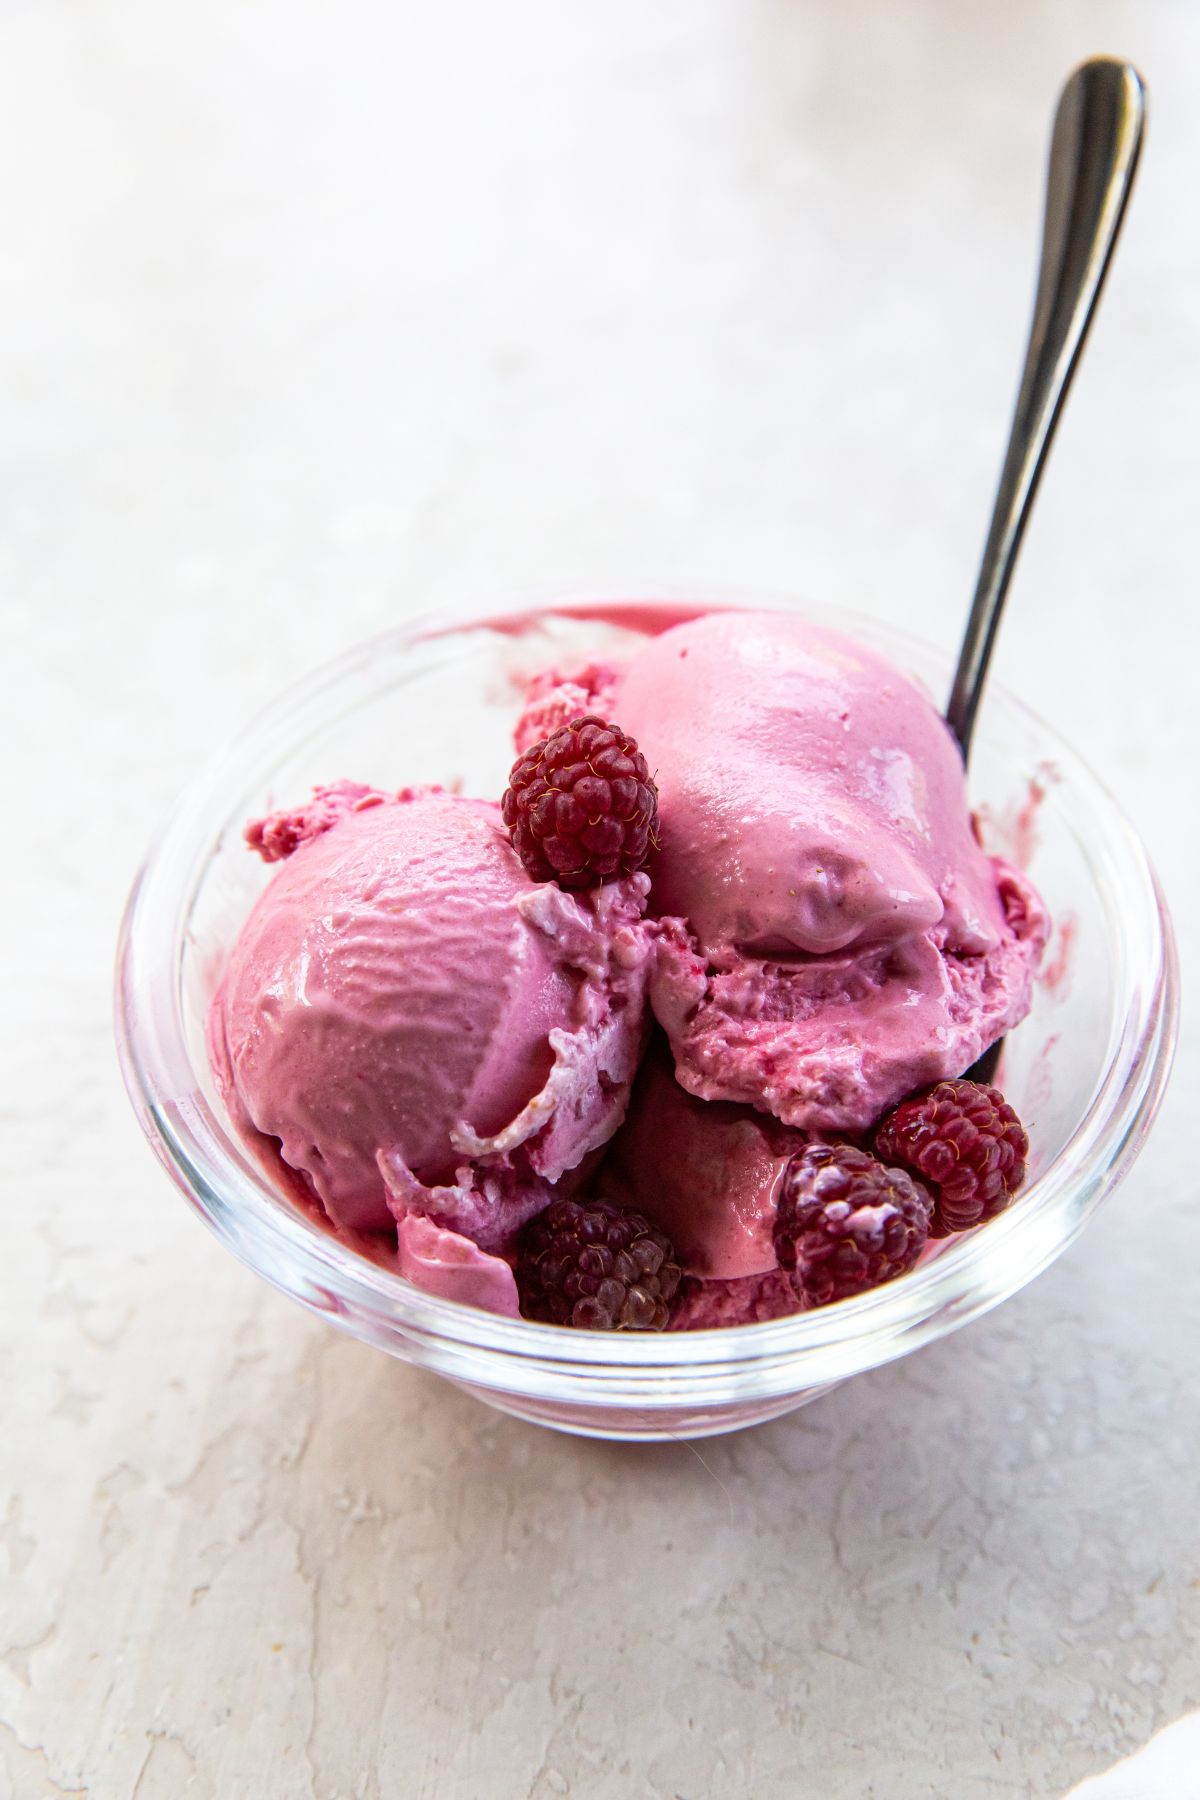 A bowl of raspberry ice cream with a spoon.